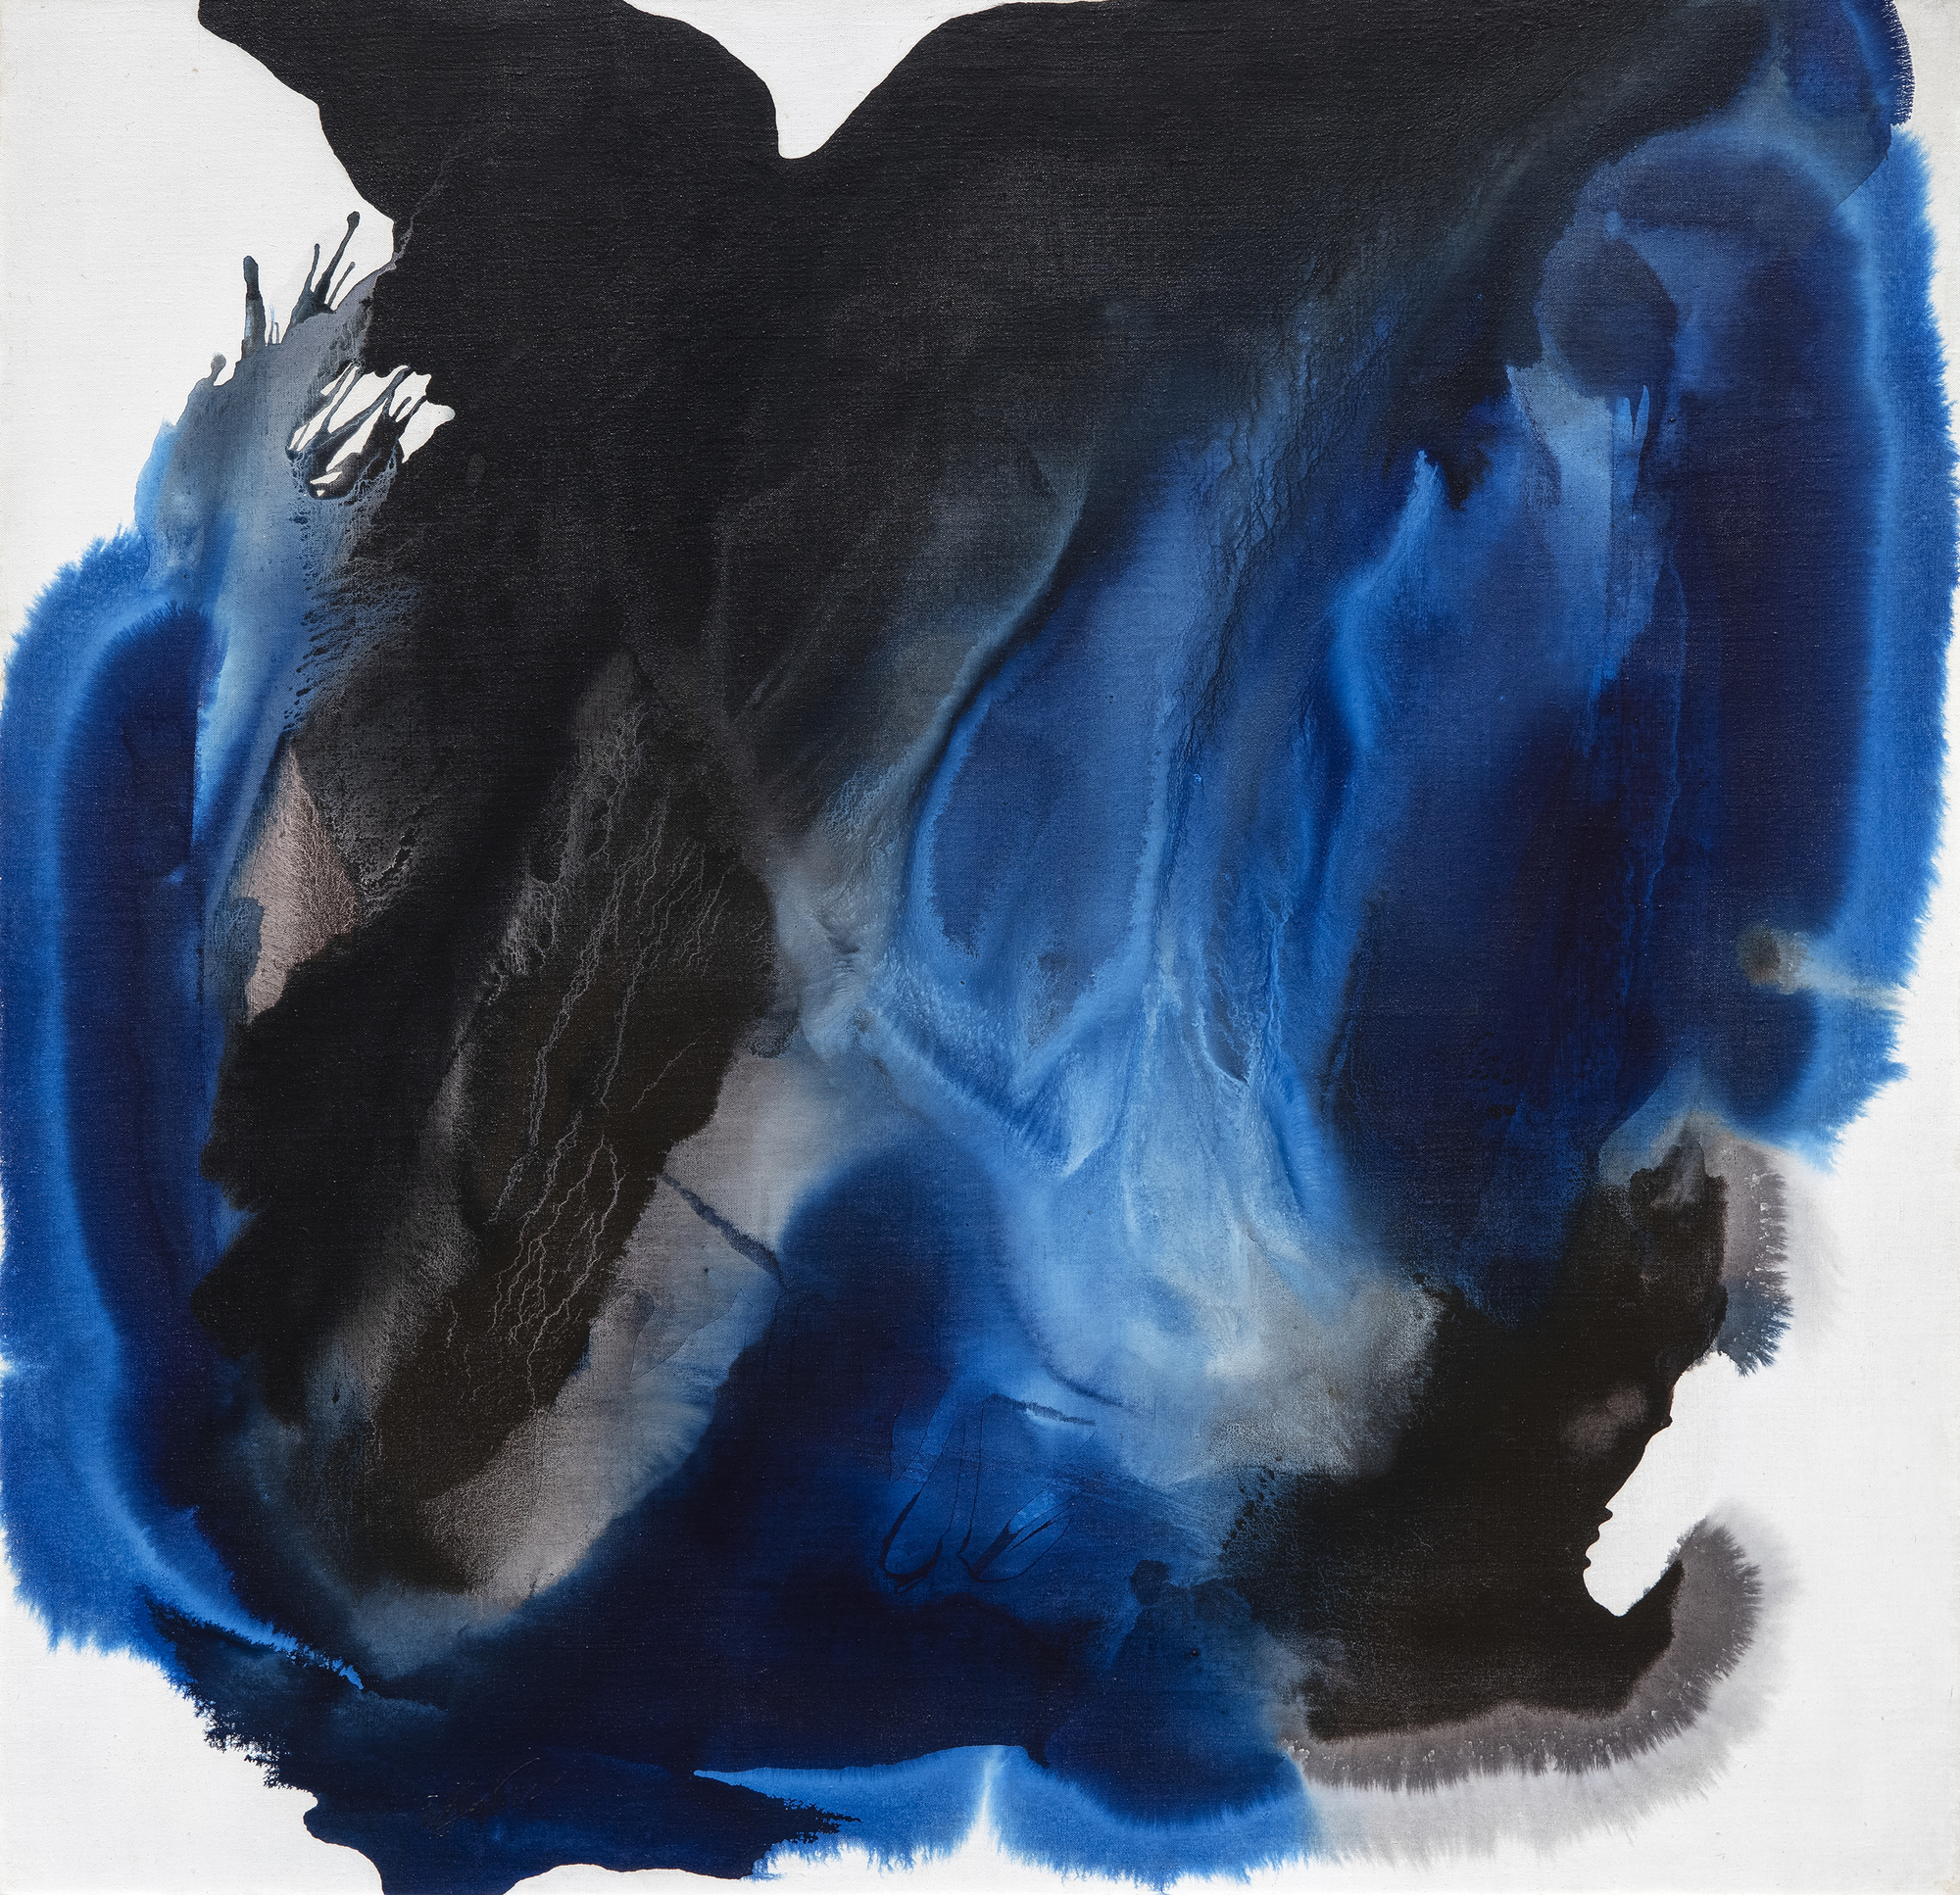 PAUL JENKINS - Phenomena with Black Anadem - ink, acrylic and oil on canvas - 51 x 51 in.